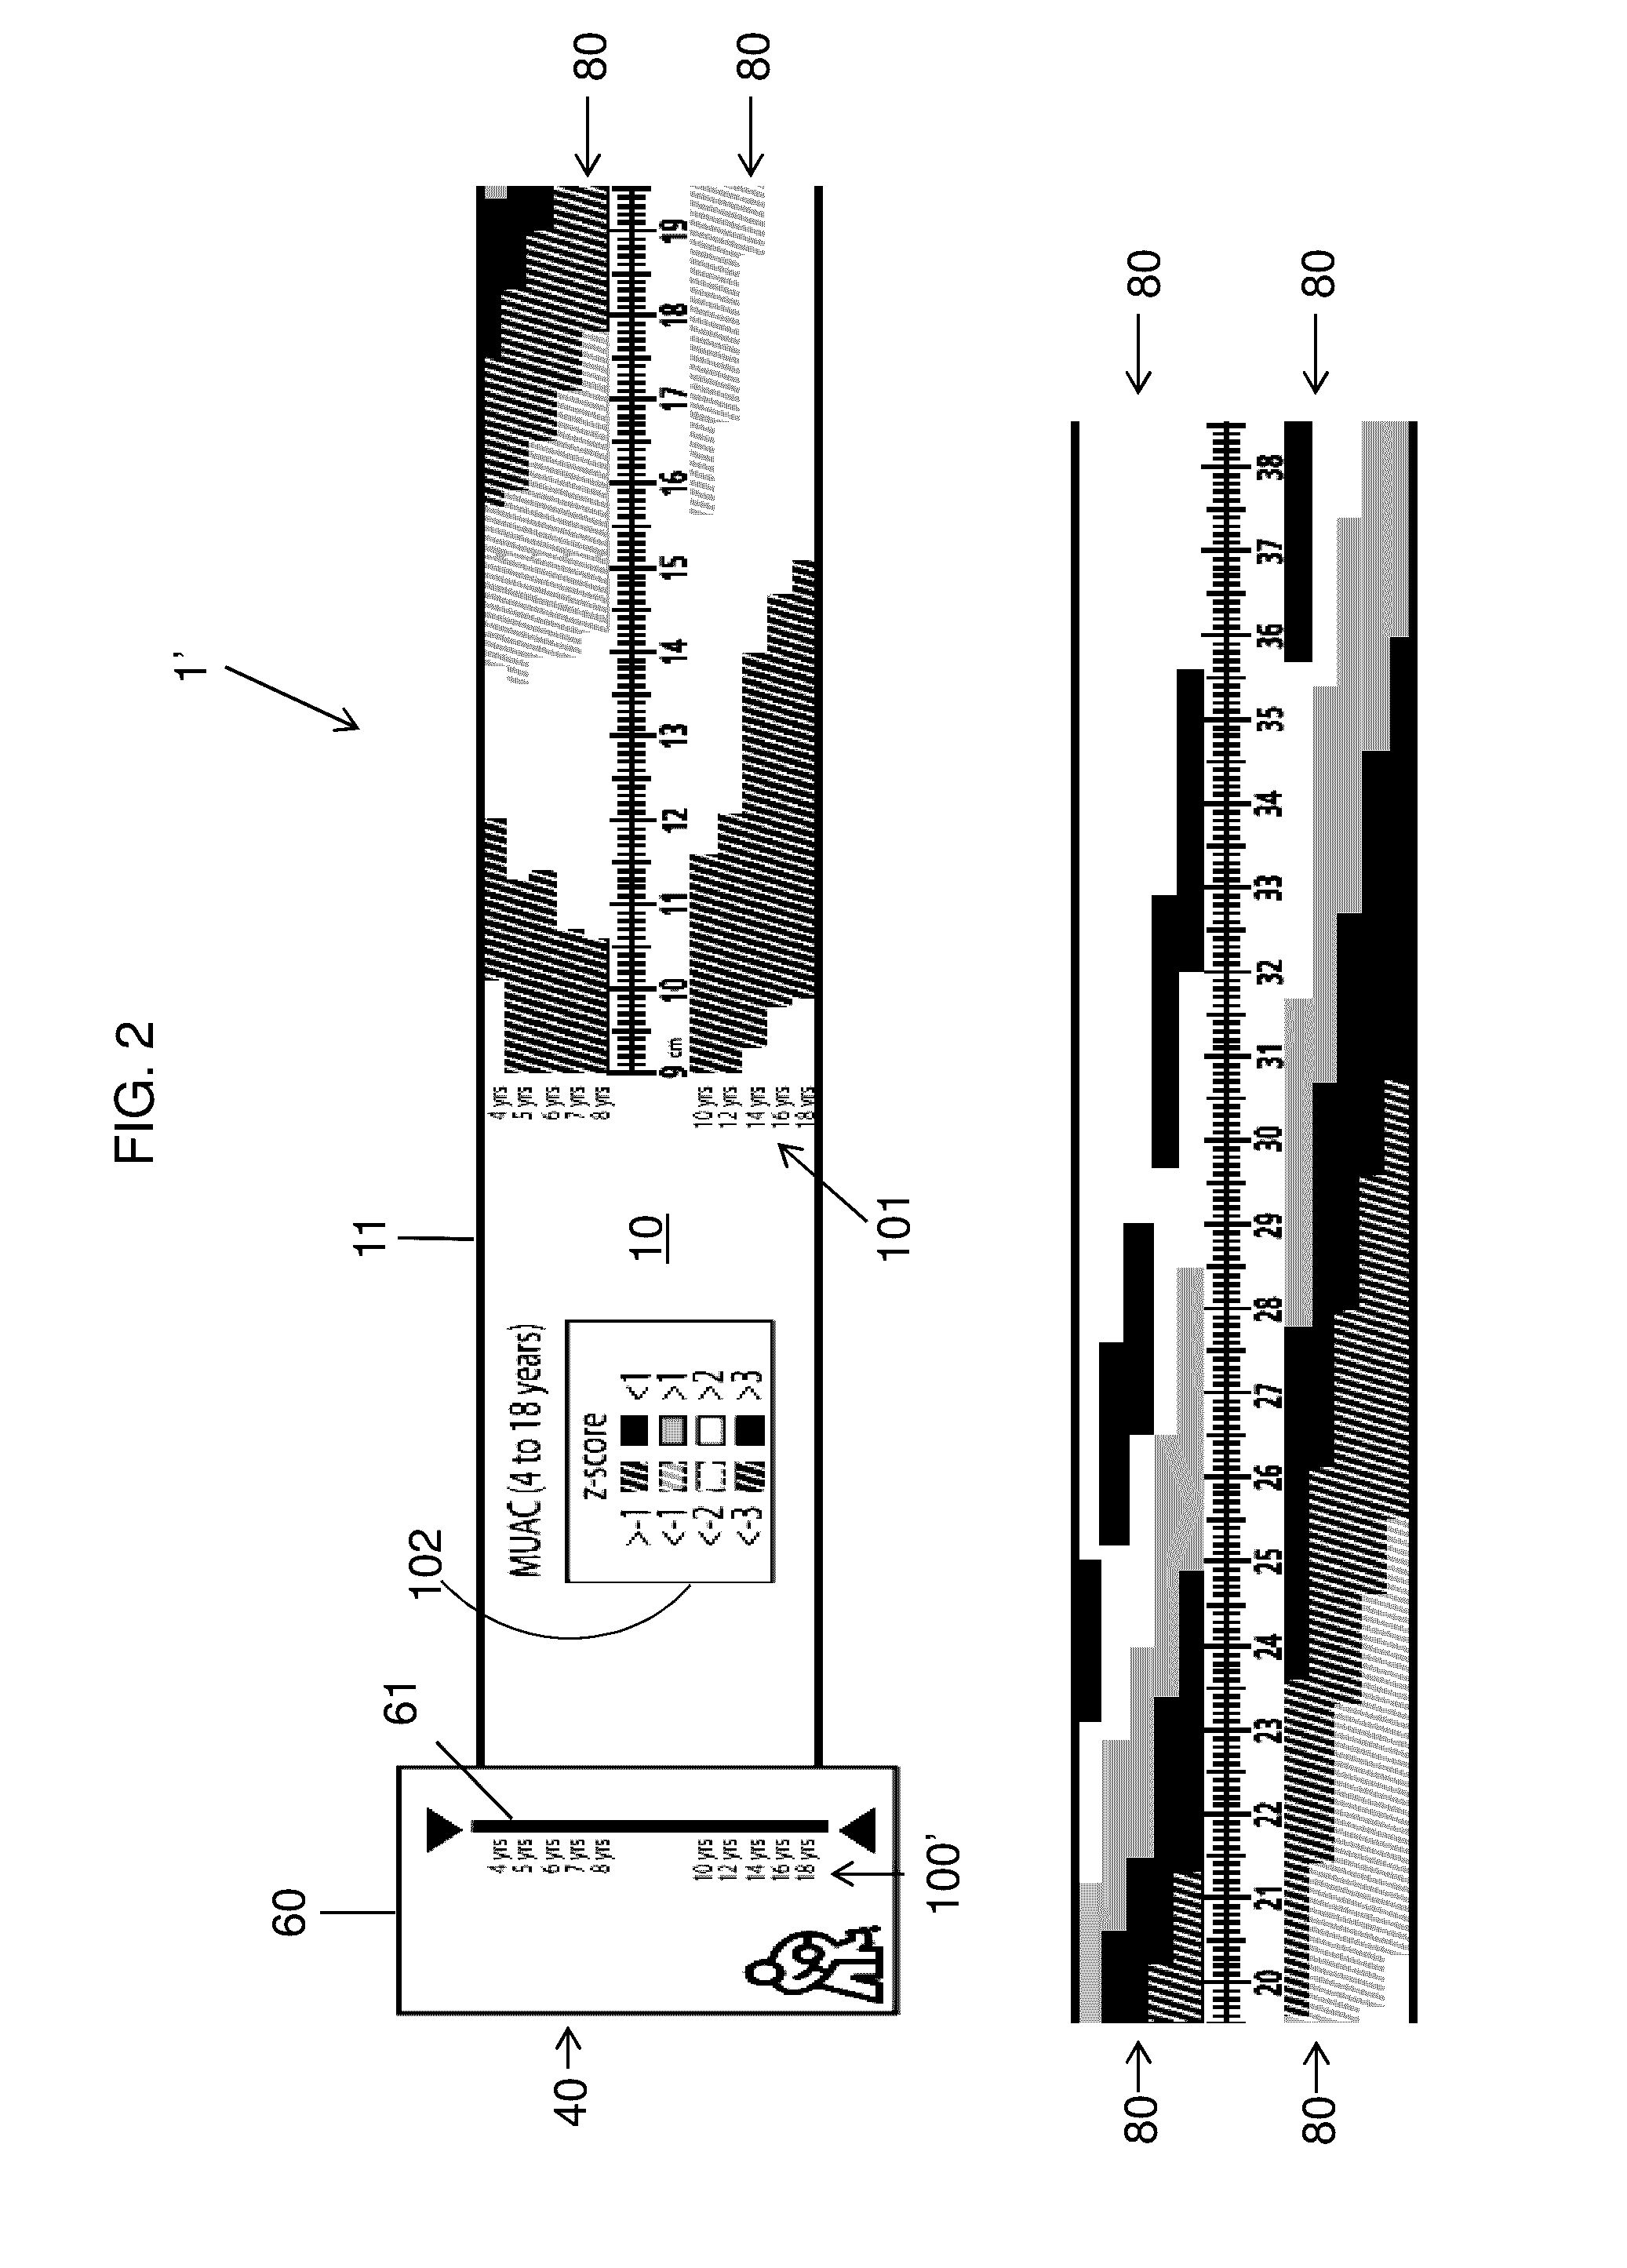 Muac z-score tape and methods of use thereof